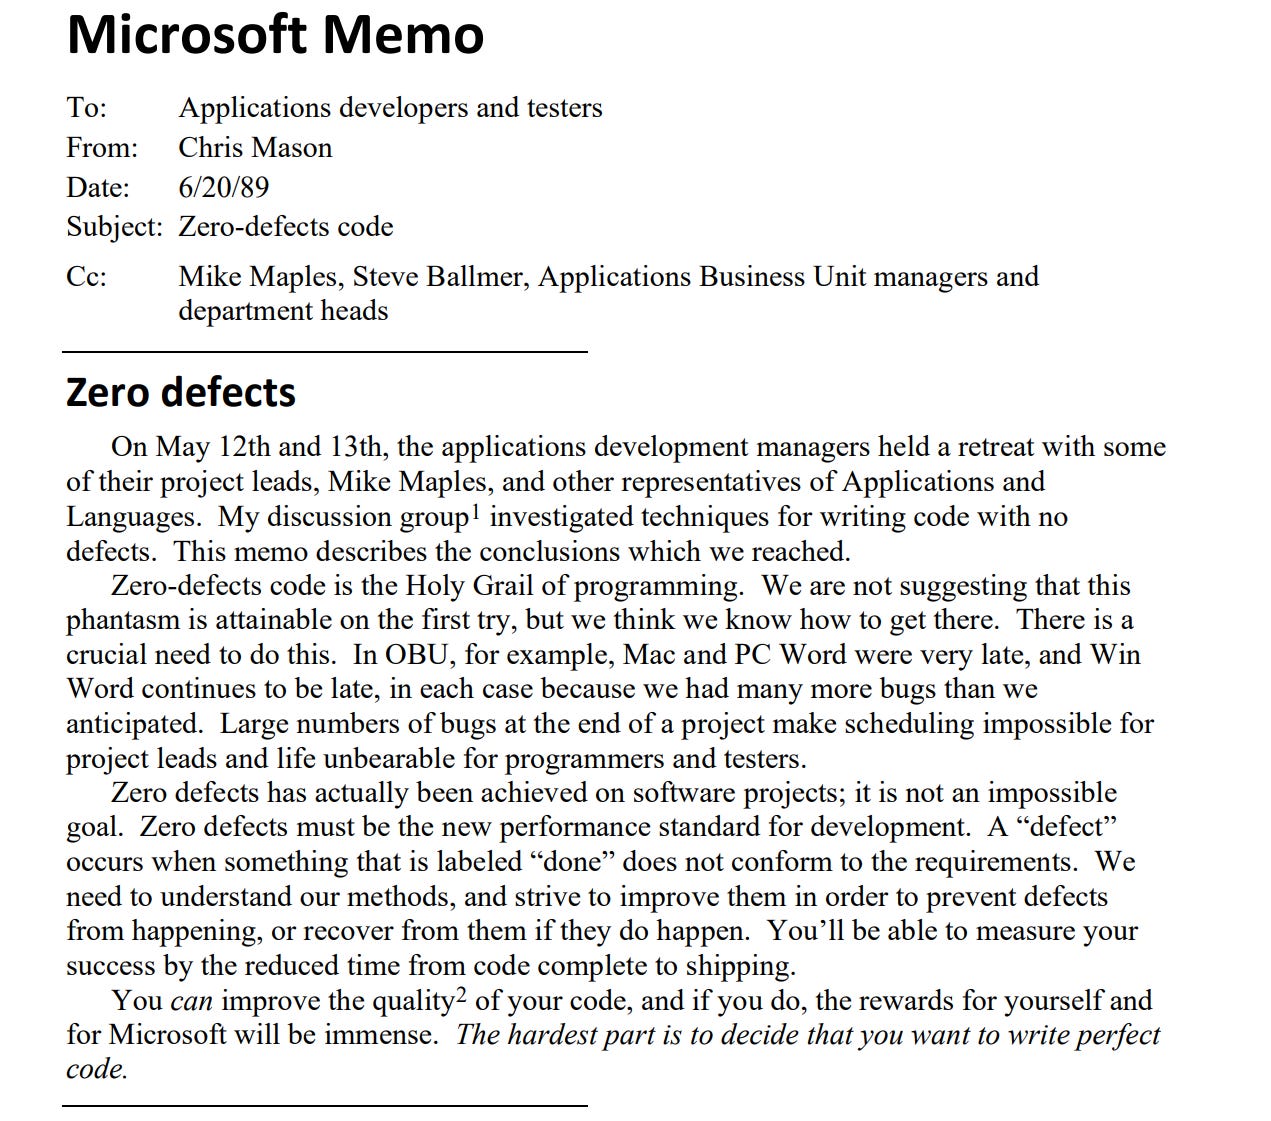 Microsoft Memo To: Applications developers and testers From: Chris Mason Date: 6/20/89 Subject: Zero-defects code Cc: Mike Maples, Steve Ballmer, Applications Business Unit managers and department heads Zero defects On May 12th and 13th, the applications development managers held a retreat with some of their project leads, Mike Maples, and other representatives of Applications and Languages. My discussion group1 investigated techniques for writing code with no defects. This memo describes the conclusions which we reached. Zero-defects code is the Holy Grail of programming. We are not suggesting that this phantasm is attainable on the first try, but we think we know how to get there. There is a crucial need to do this. In OBU, for example, Mac and PC Word were very late, and Win Word continues to be late, in each case because we had many more bugs than we anticipated. Large numbers of bugs at the end of a project make scheduling impossible for project leads and life unbearable for programmers and testers. Zero defects has actually been achieved on software projects; it is not an impossible goal. Zero defects must be the new performance standard for development. A “defect” occurs when something that is labeled “done” does not conform to the requirements. We need to understand our methods, and strive to improve them in order to prevent defects from happening, or recover from them if they do happen. You’ll be able to measure your success by the reduced time from code complete to shipping. You can improve the quality2 of your code, and if you do, the rewards for yourself and for Microsoft will be immense. The hardest part is to decide that you want to write perfect code.